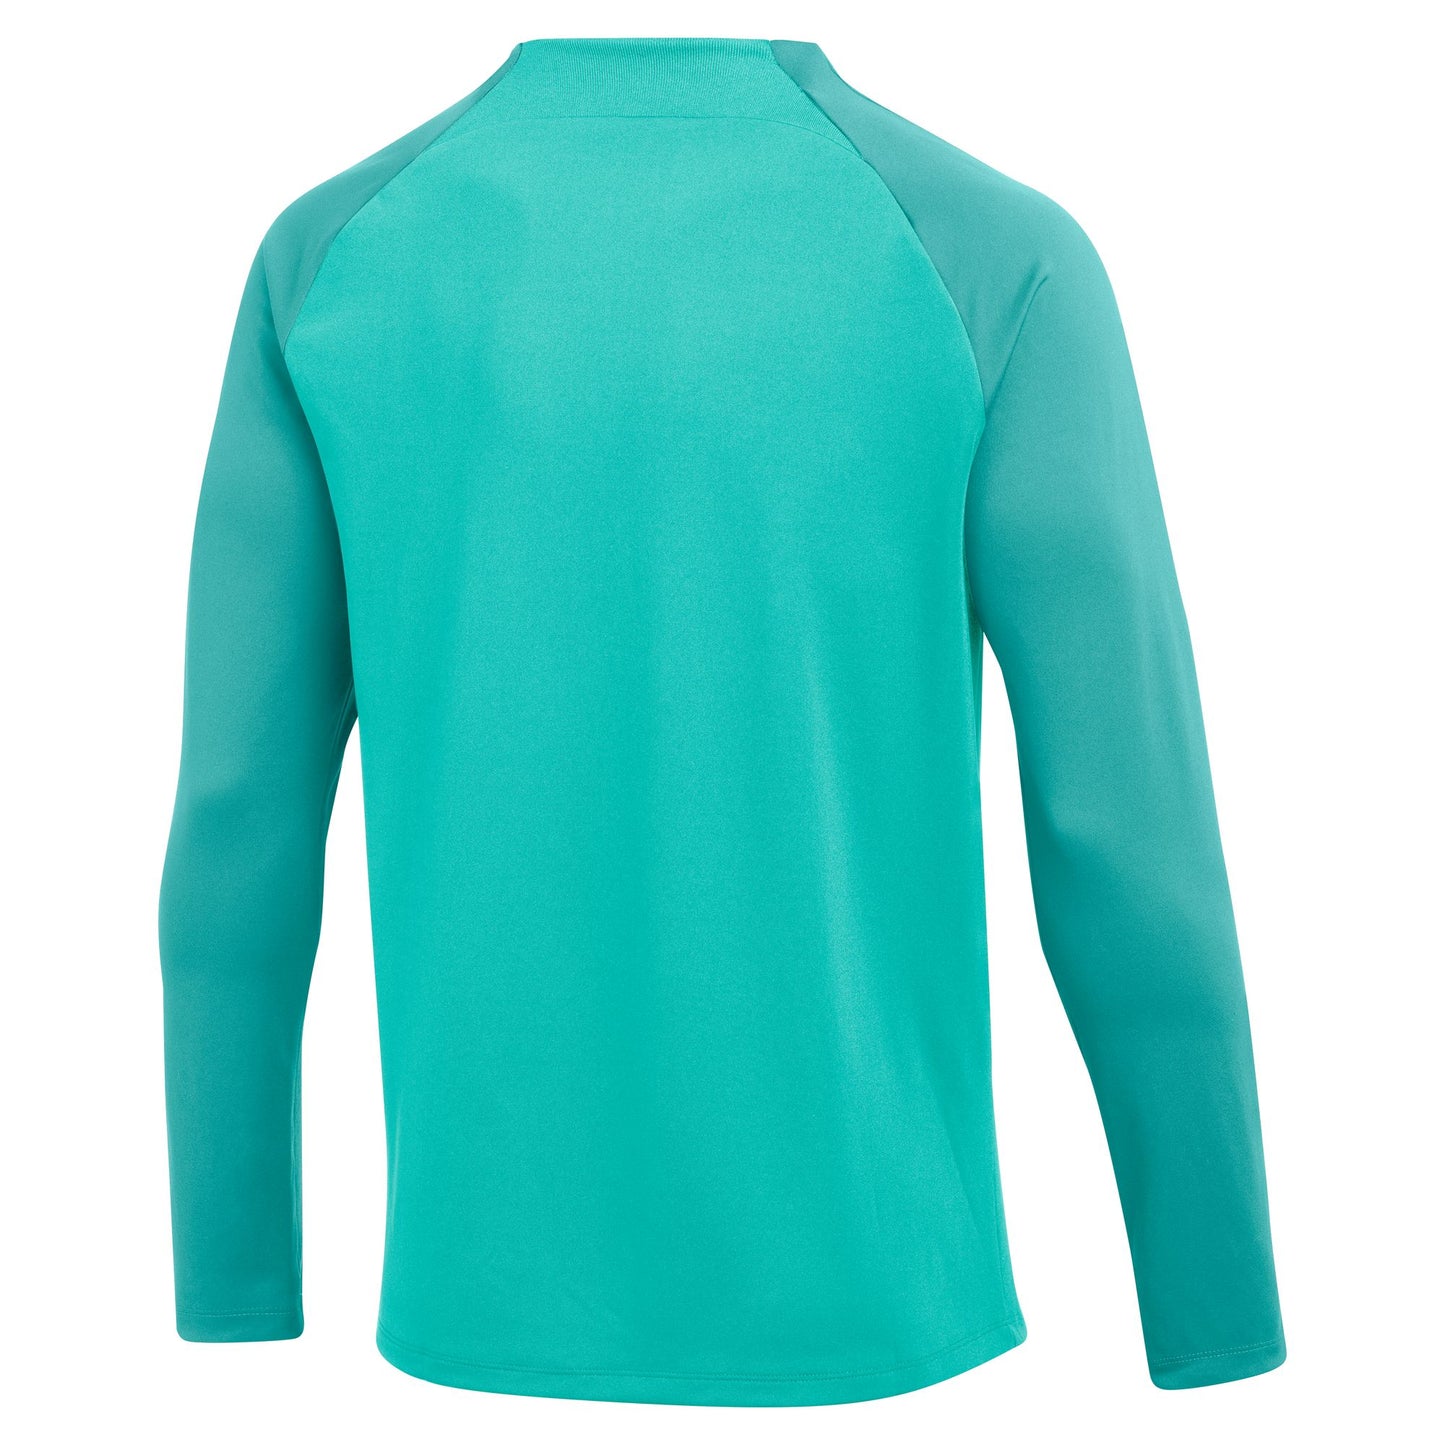 Indie Chicas Acd Pro Drill Top [Men's]